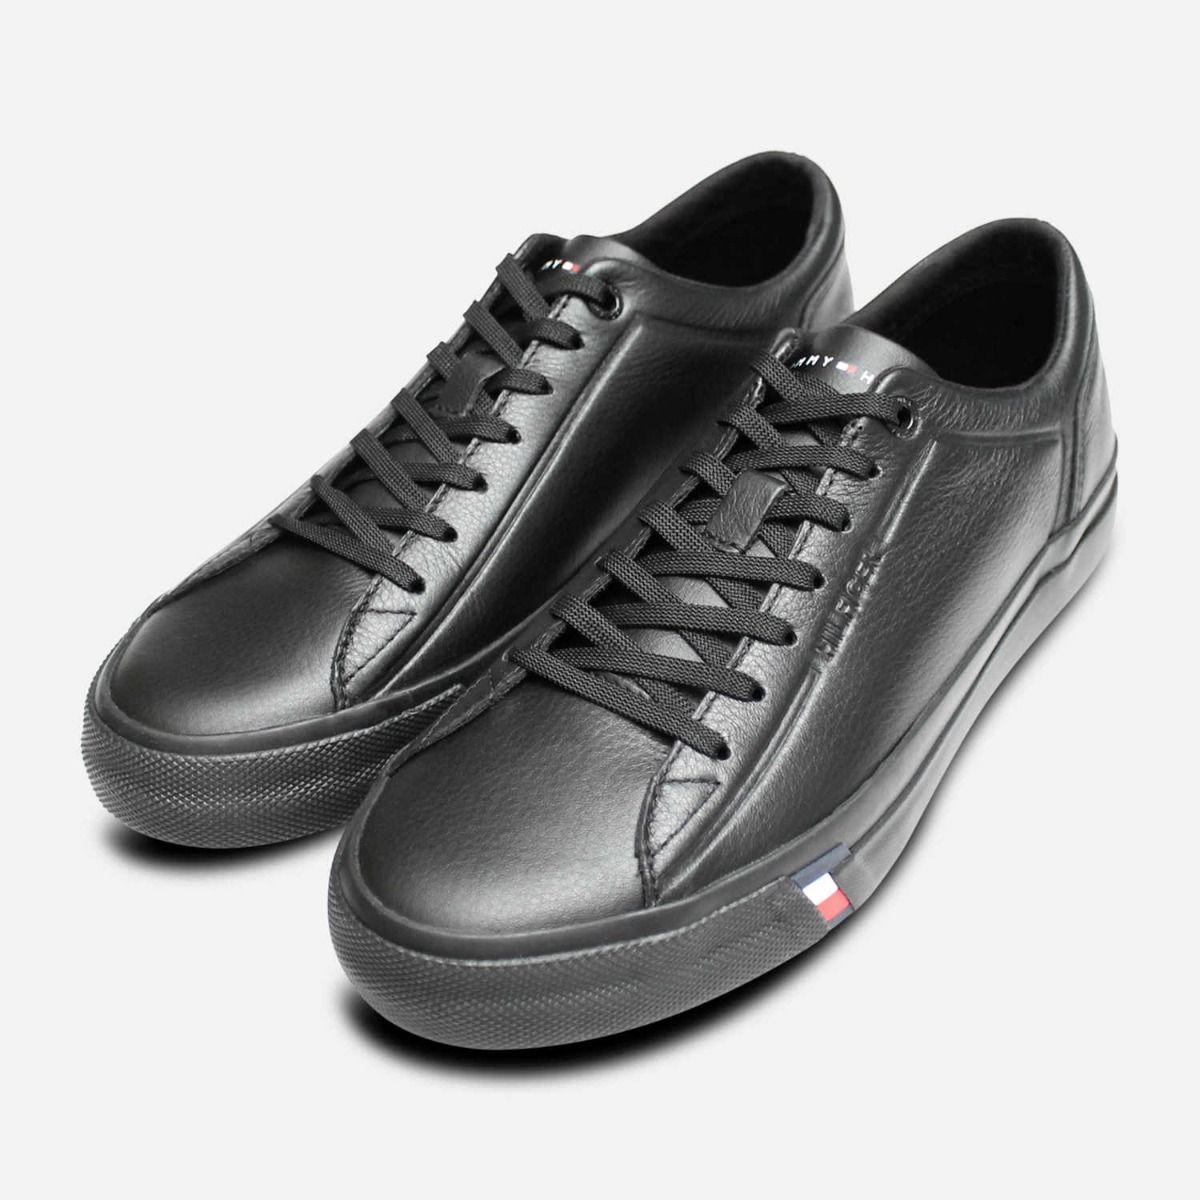 Premium Black Leather Lace Up Trainers